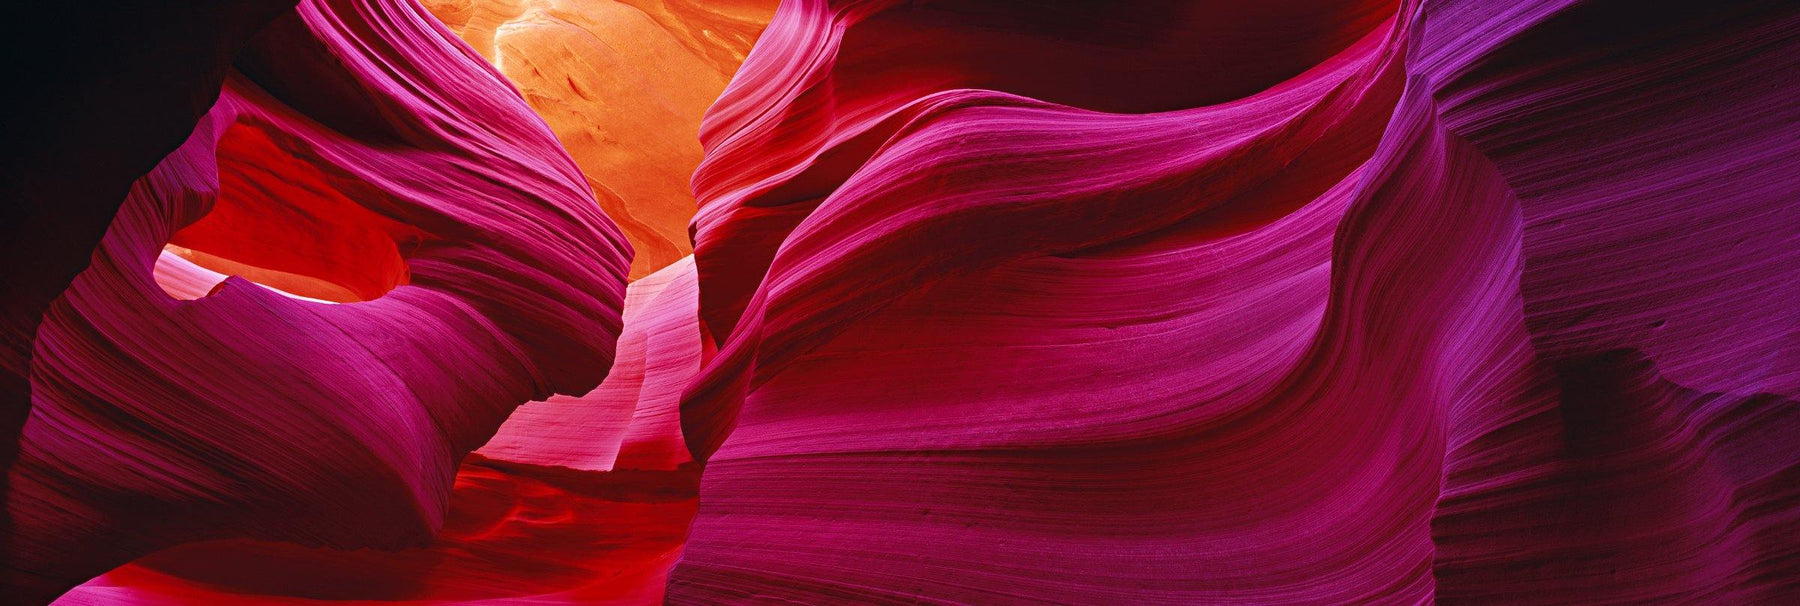 Flowing sandstone walls of the slot canyons in Antelope Canyon Arizona